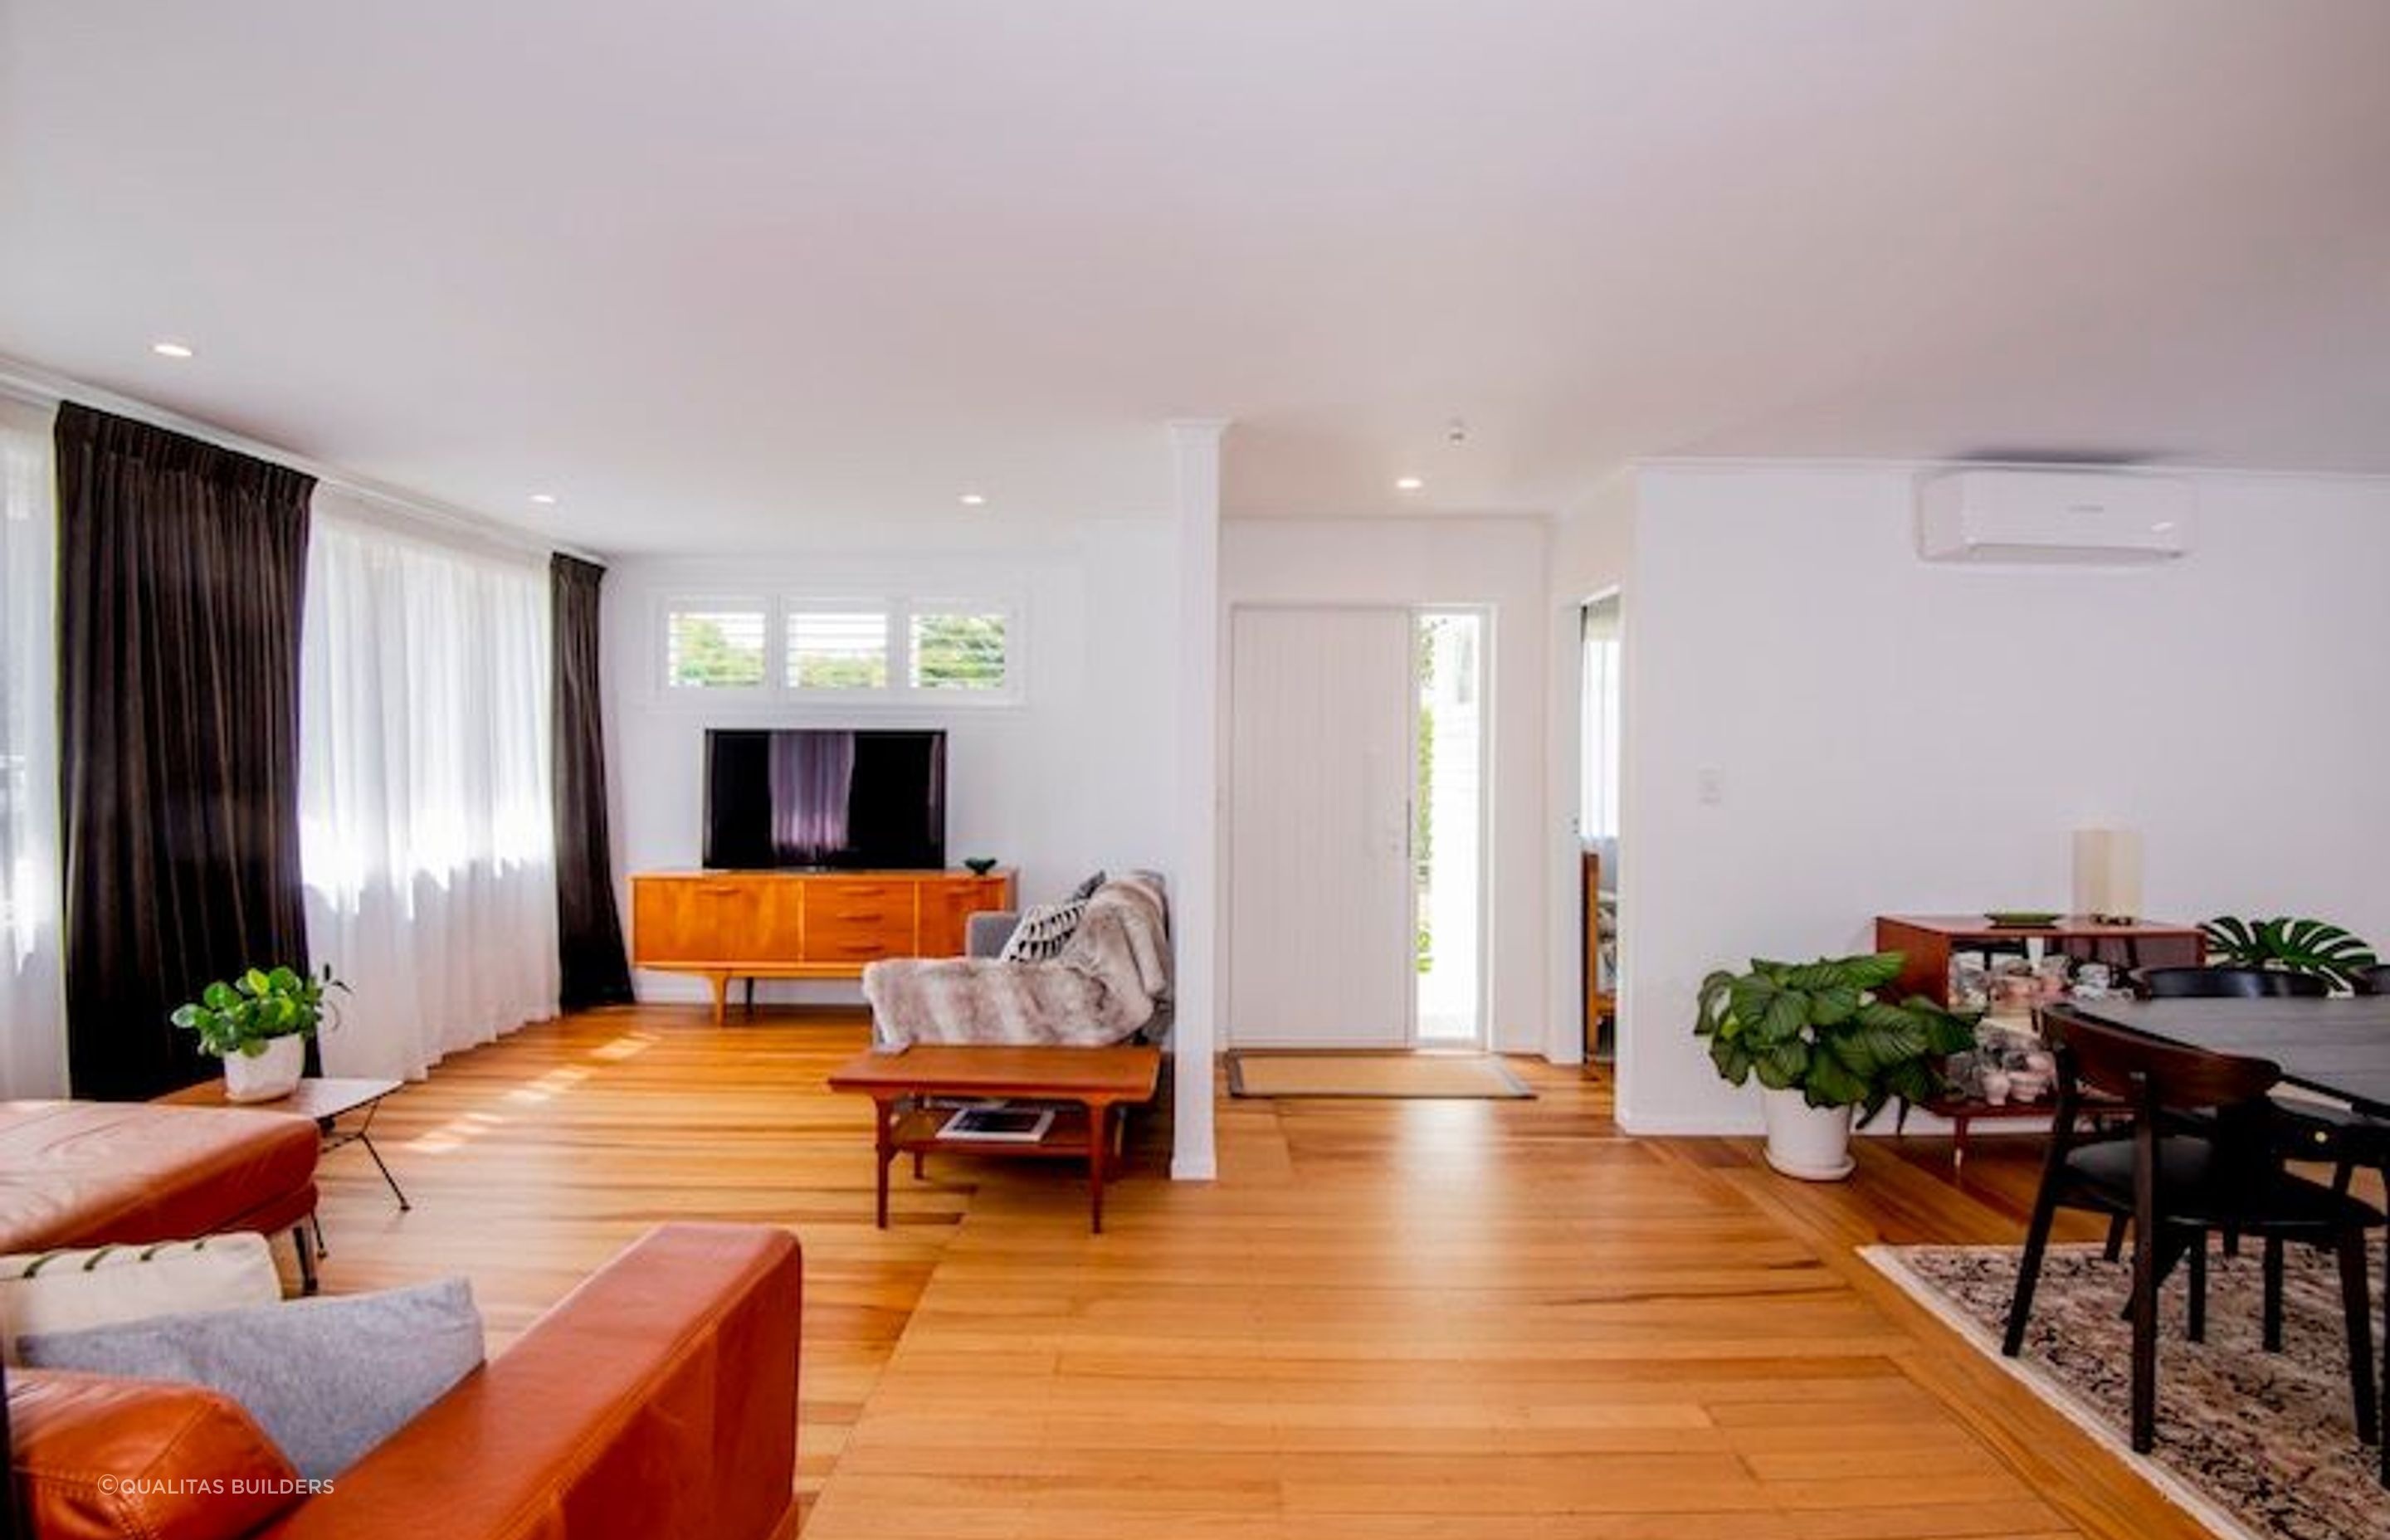 The original flooring was transformed, a hallway was removed for a wide open plan layout.